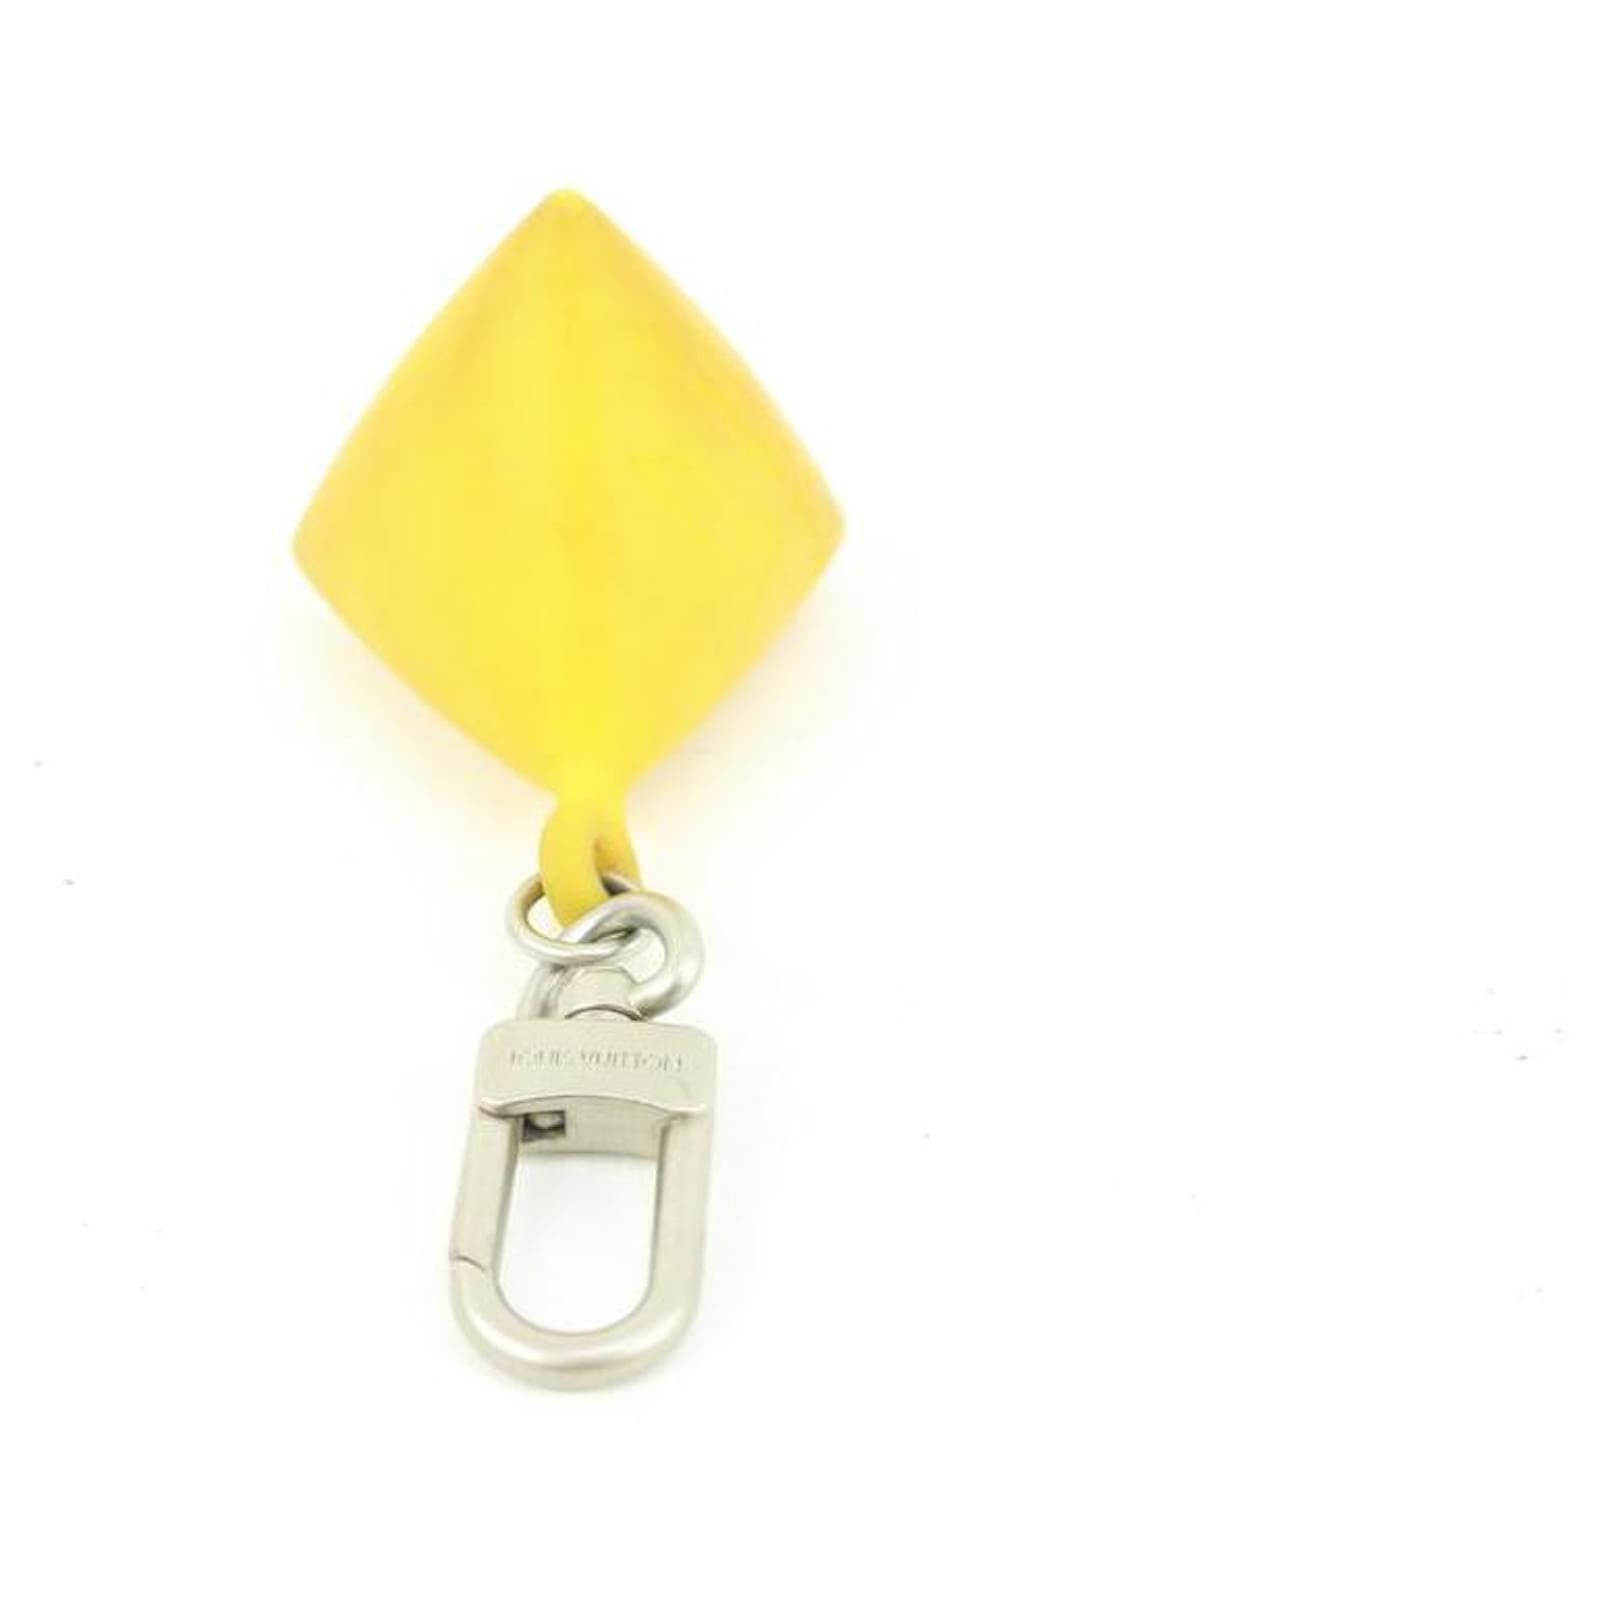 Louis Vuitton Yellow Rubber Limited Edition LV Cup Key Ring Holder